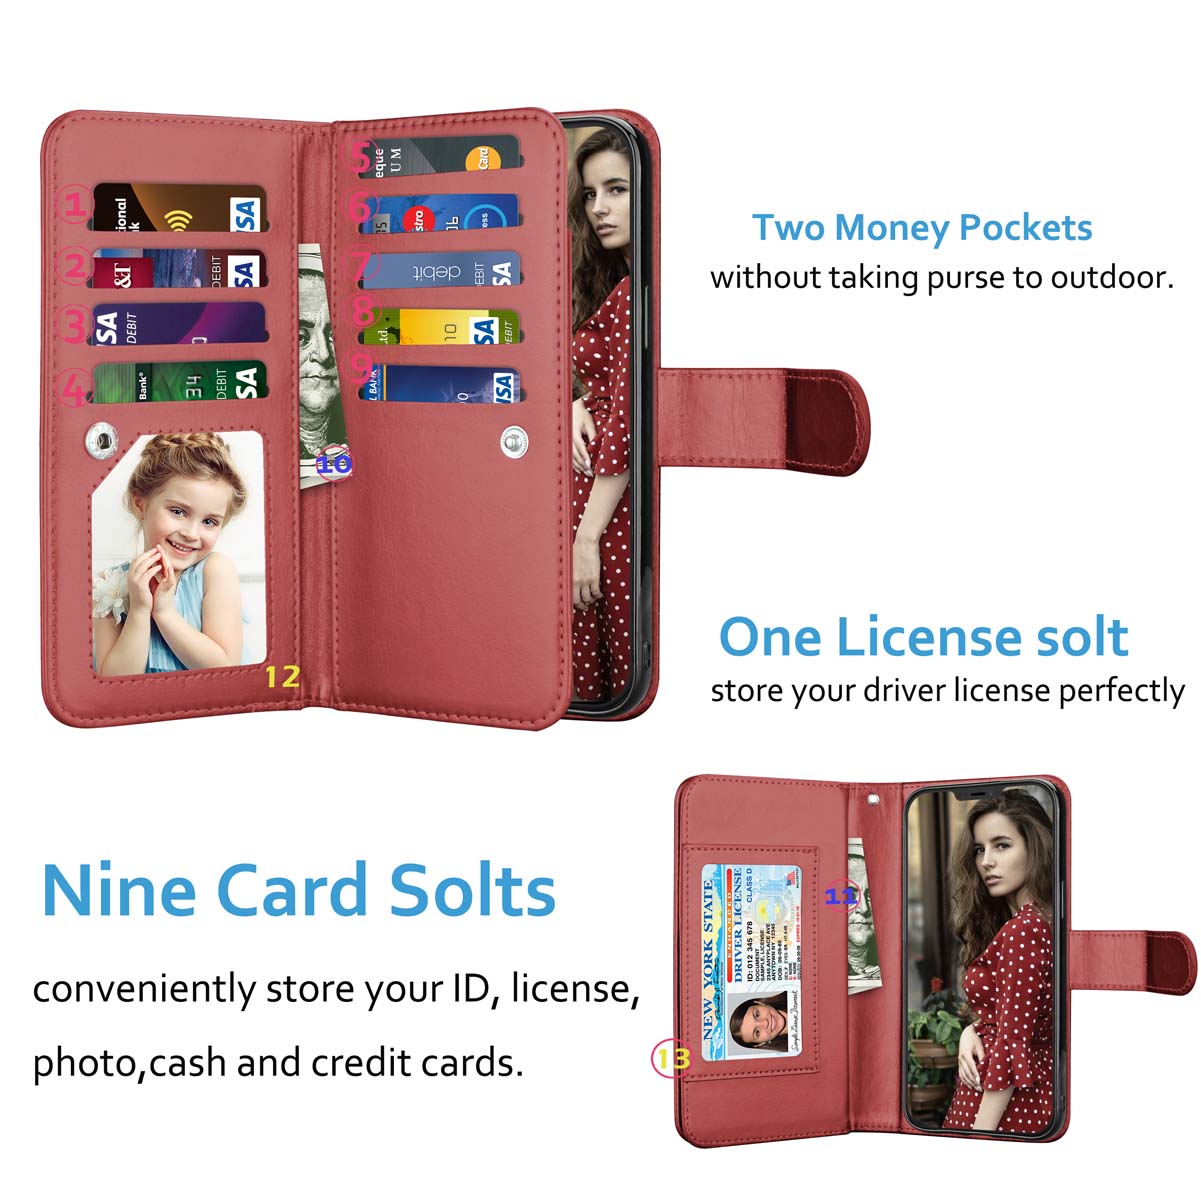 iPhone 12 Mini Case, Wallet Case iPhone 12, iPhone 12 Mini PU Leather Case, Njjex PU Leather Magnet Stand Wallet Credit Card Holder Flip Case 9 Card Slots Case for Apple iPhone 12 Mini 5.4" 2020 -Wine - image 2 of 6